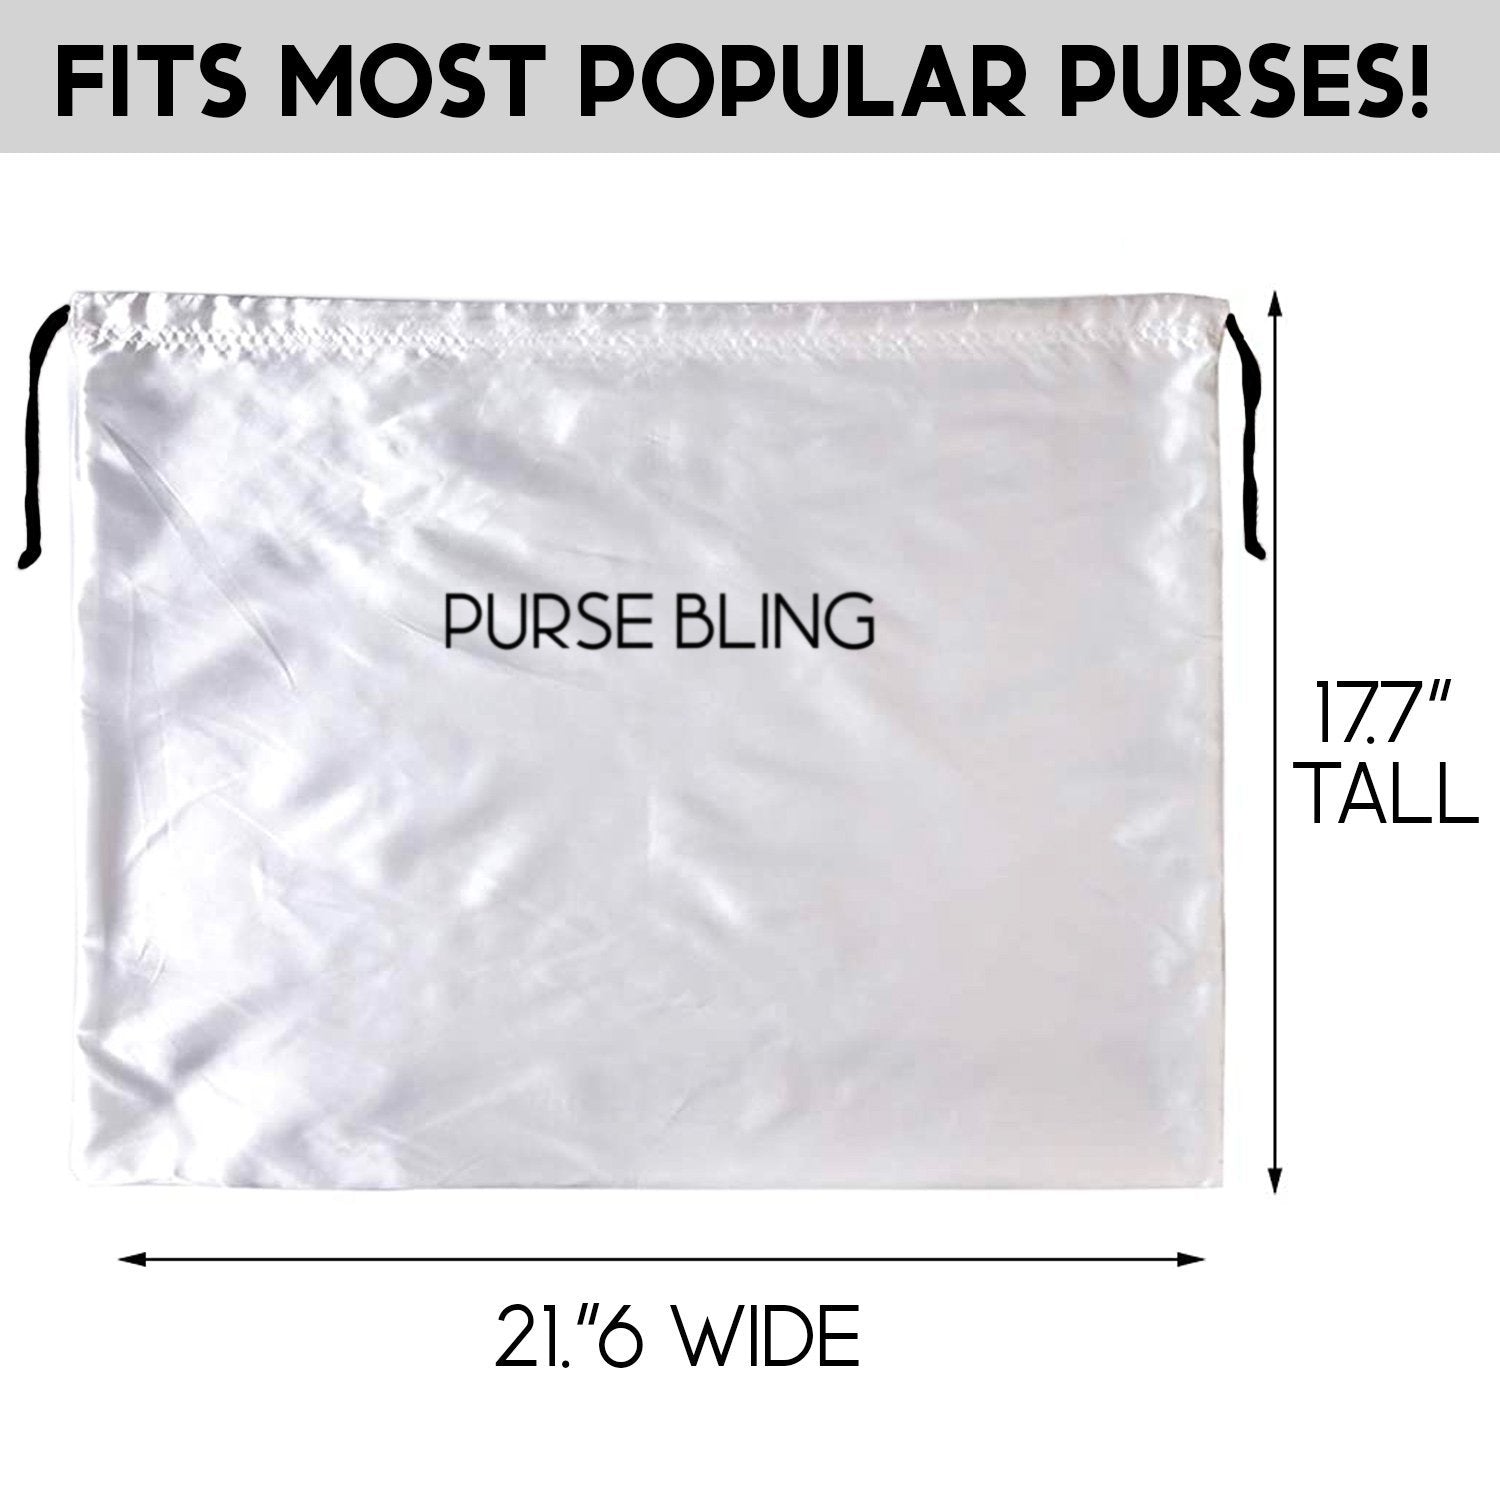 Dust Cover Storage Bags Silk Cloth with Drawstring Pouch 5 Pack Large Dust  Bags